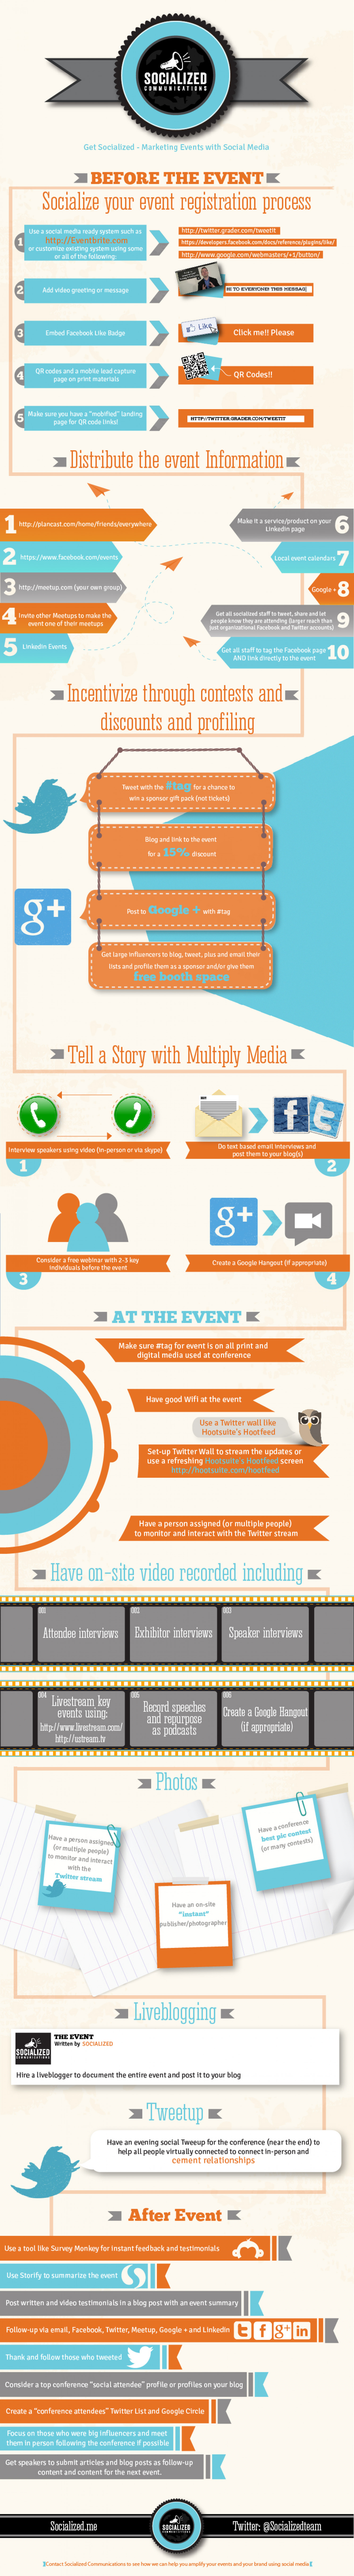 Marketing and Amplifying Your Events With Social Media  Infographic